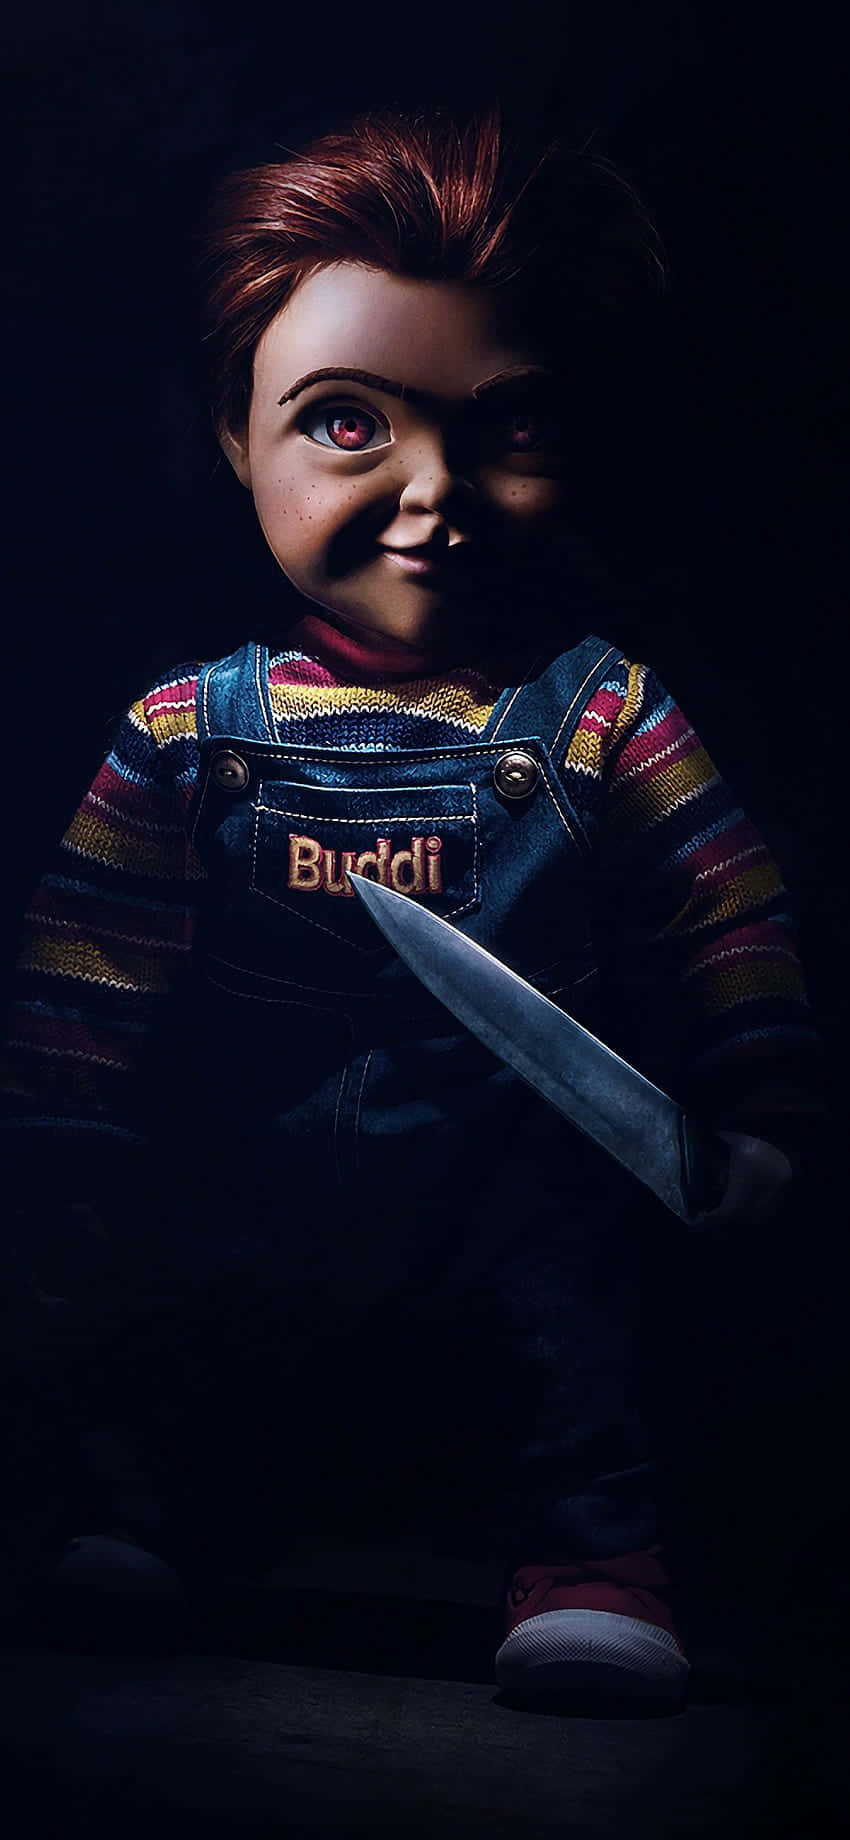 Brace Yourself for Terror - Chucky is Coming